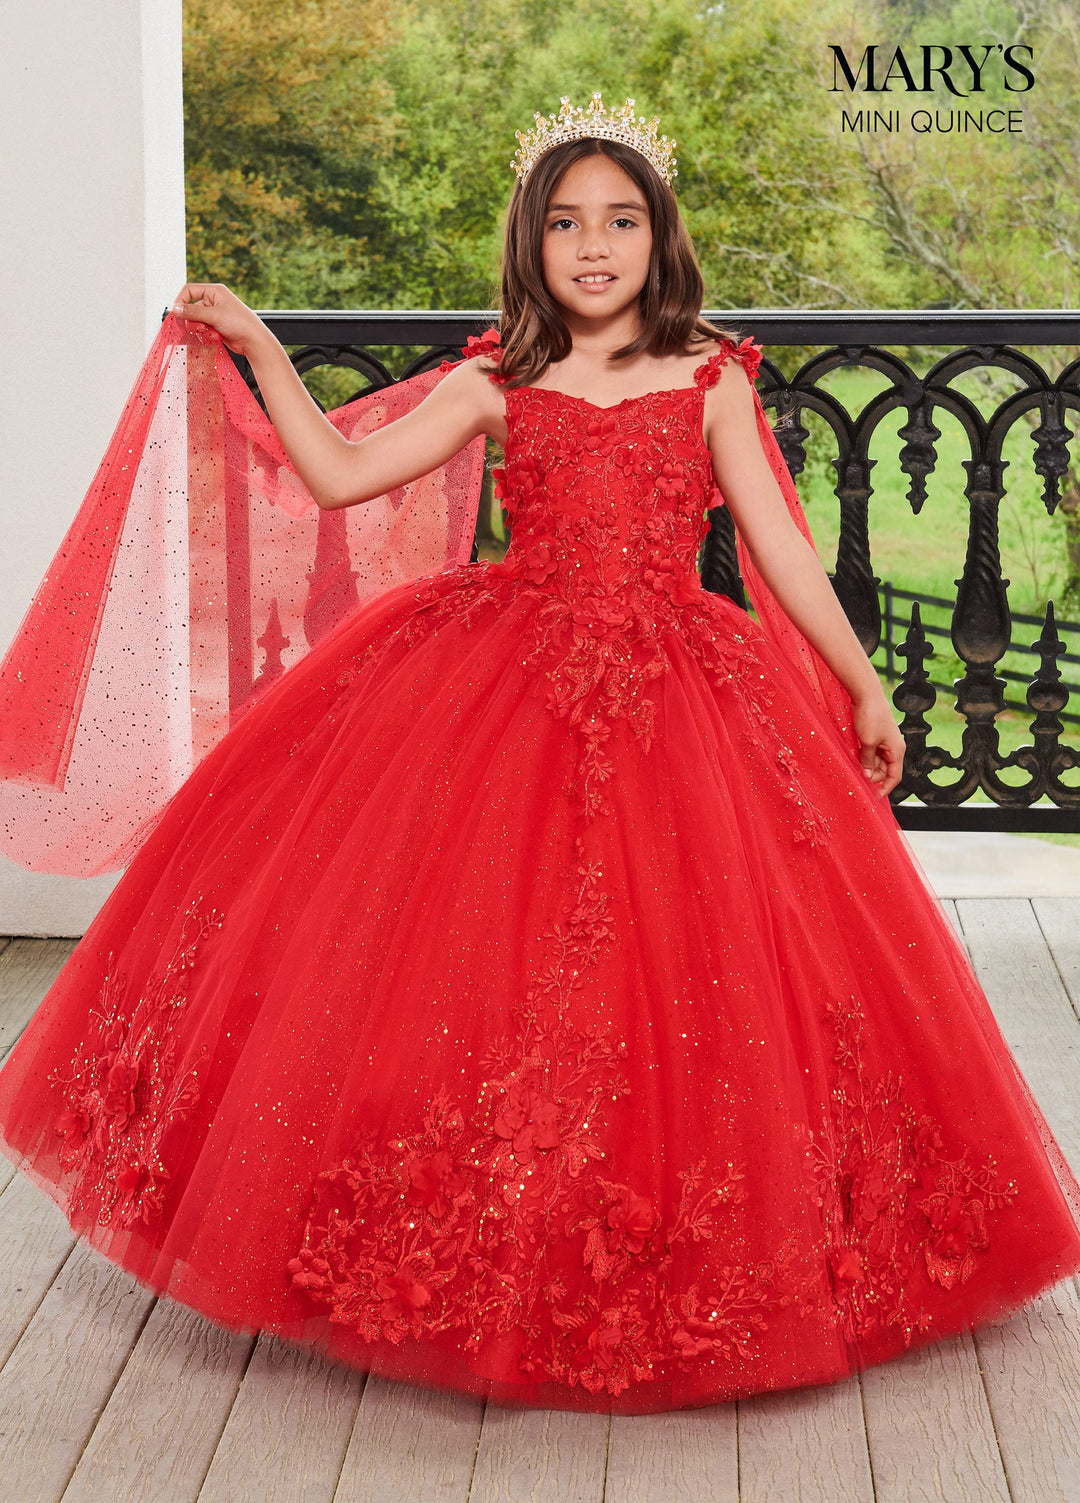 Girls 3D Floral Tulle Gown by Mary's Bridal MQ4031